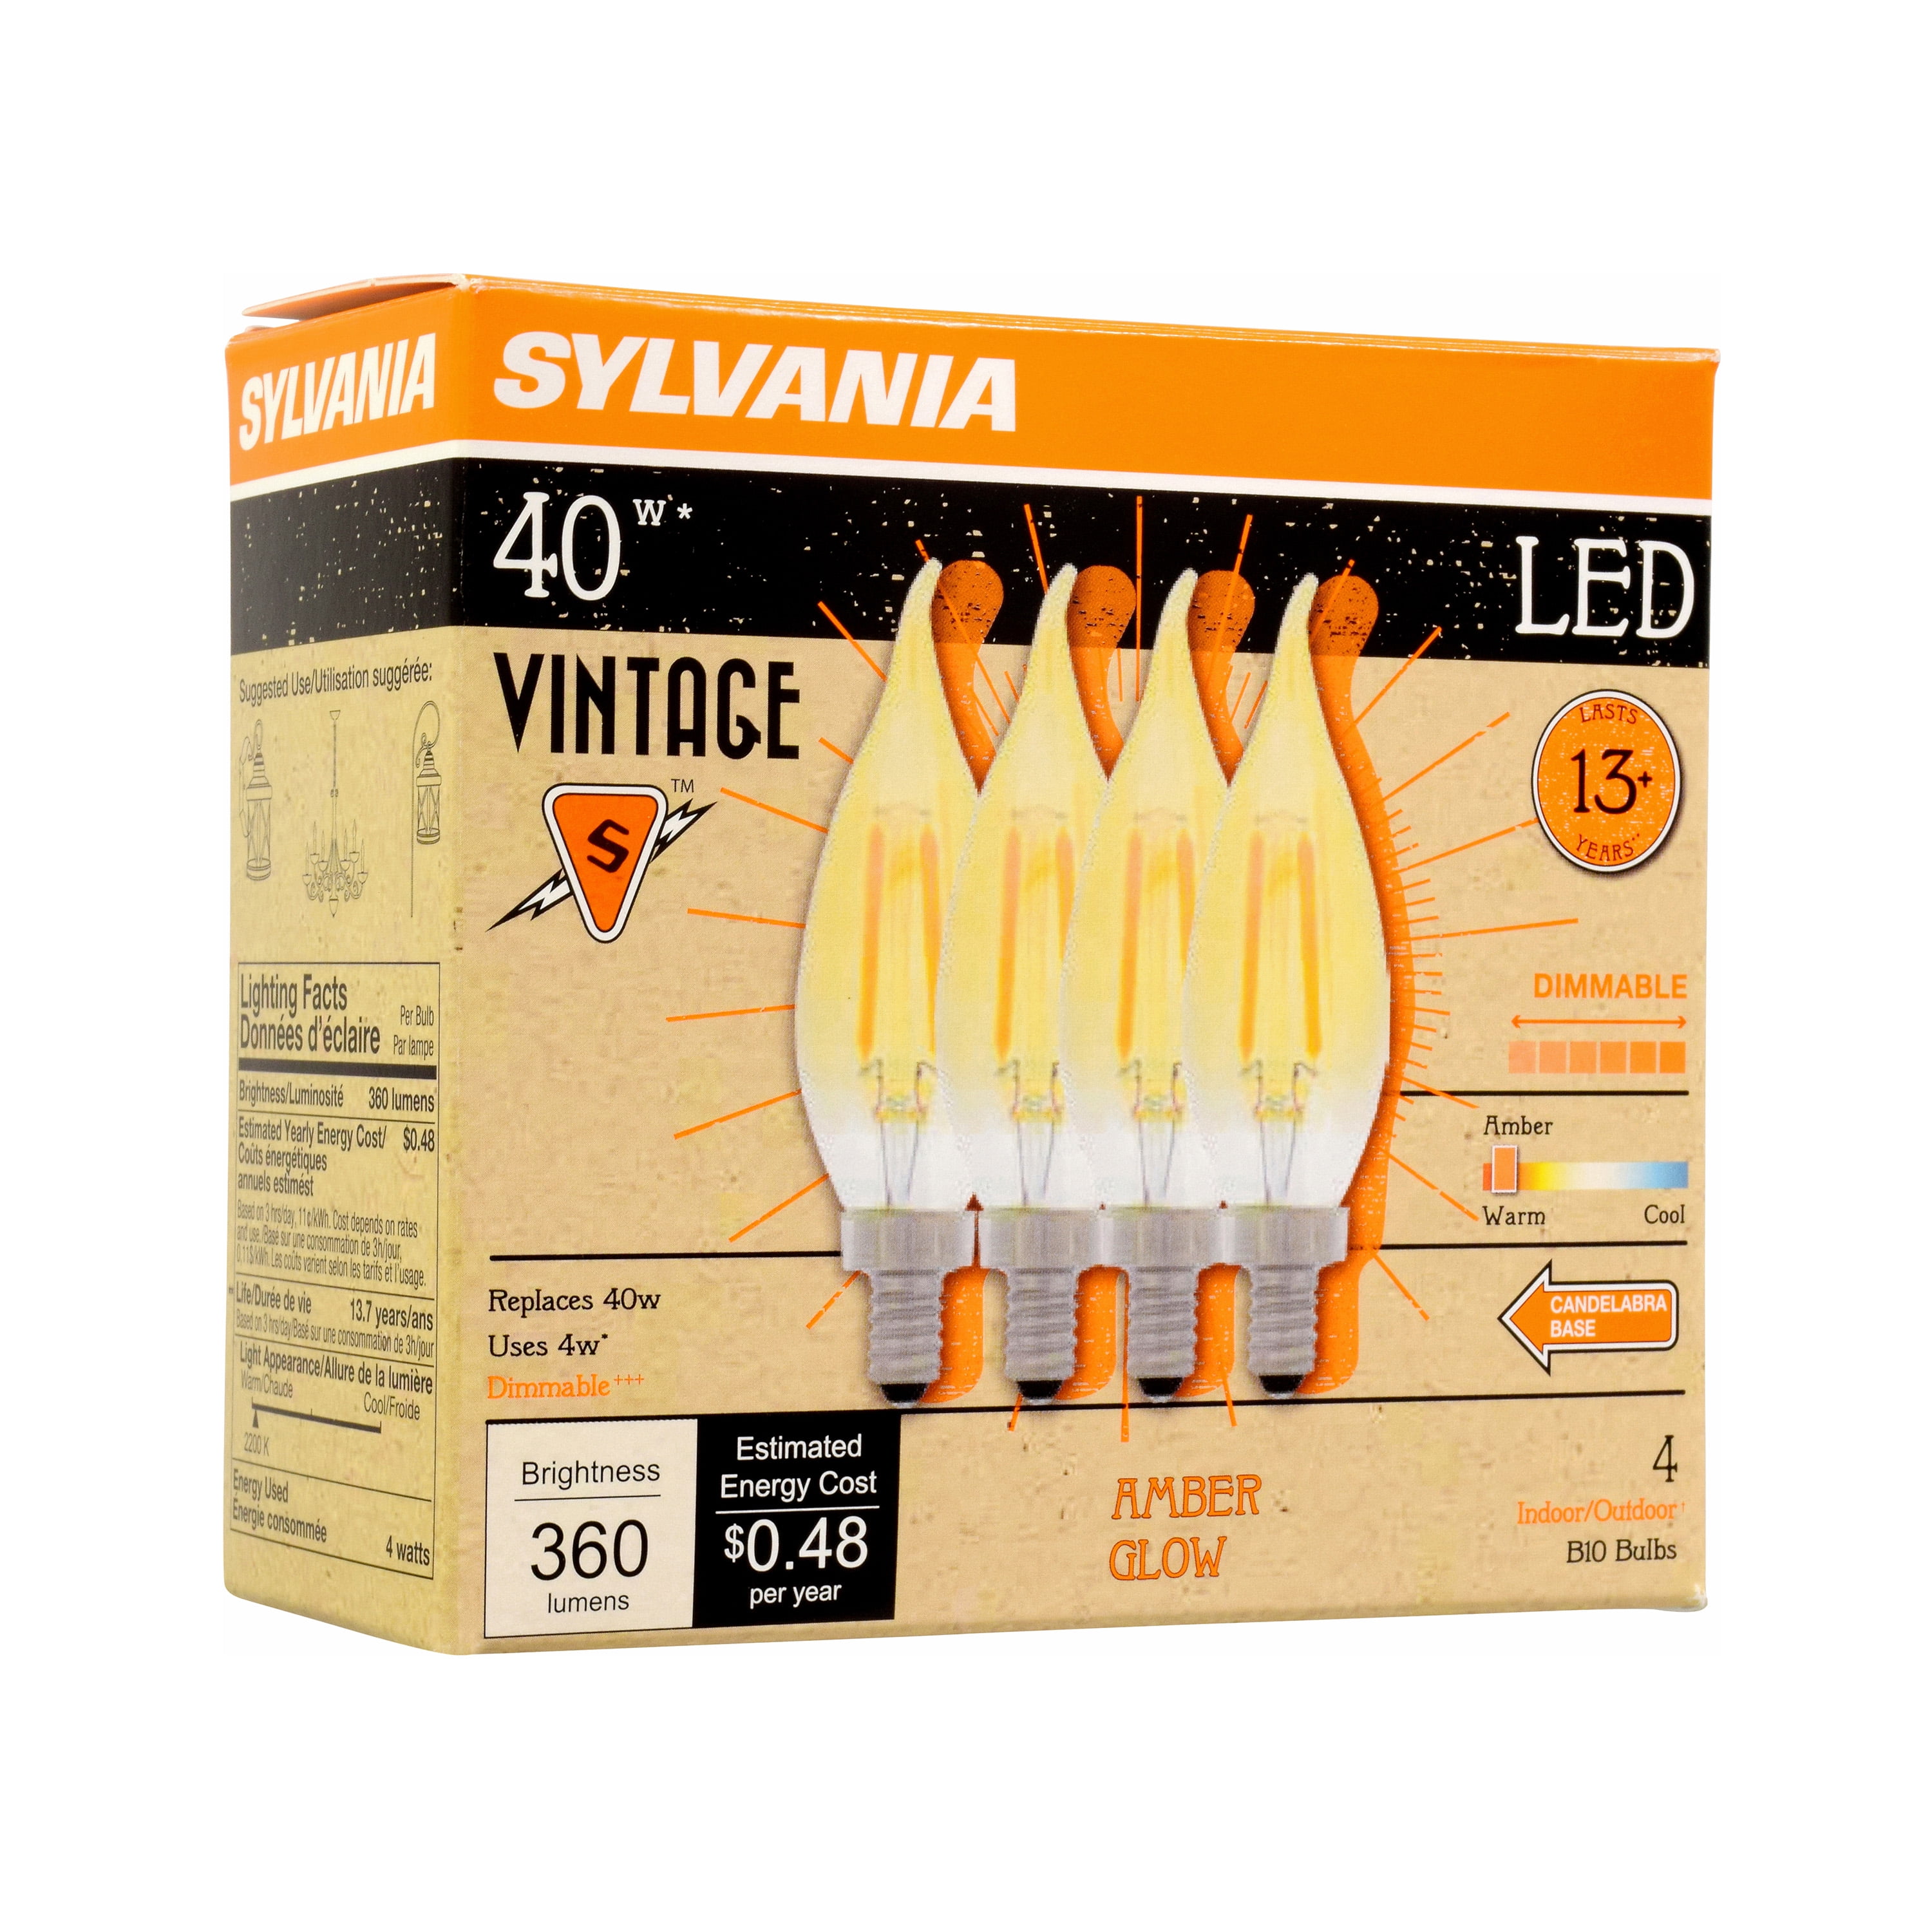 2 bulb pk SYLVANIA LED 40W B10 VINTAGE AMBER GLOW DIMMABLE/INTENSITE VARIABLE 